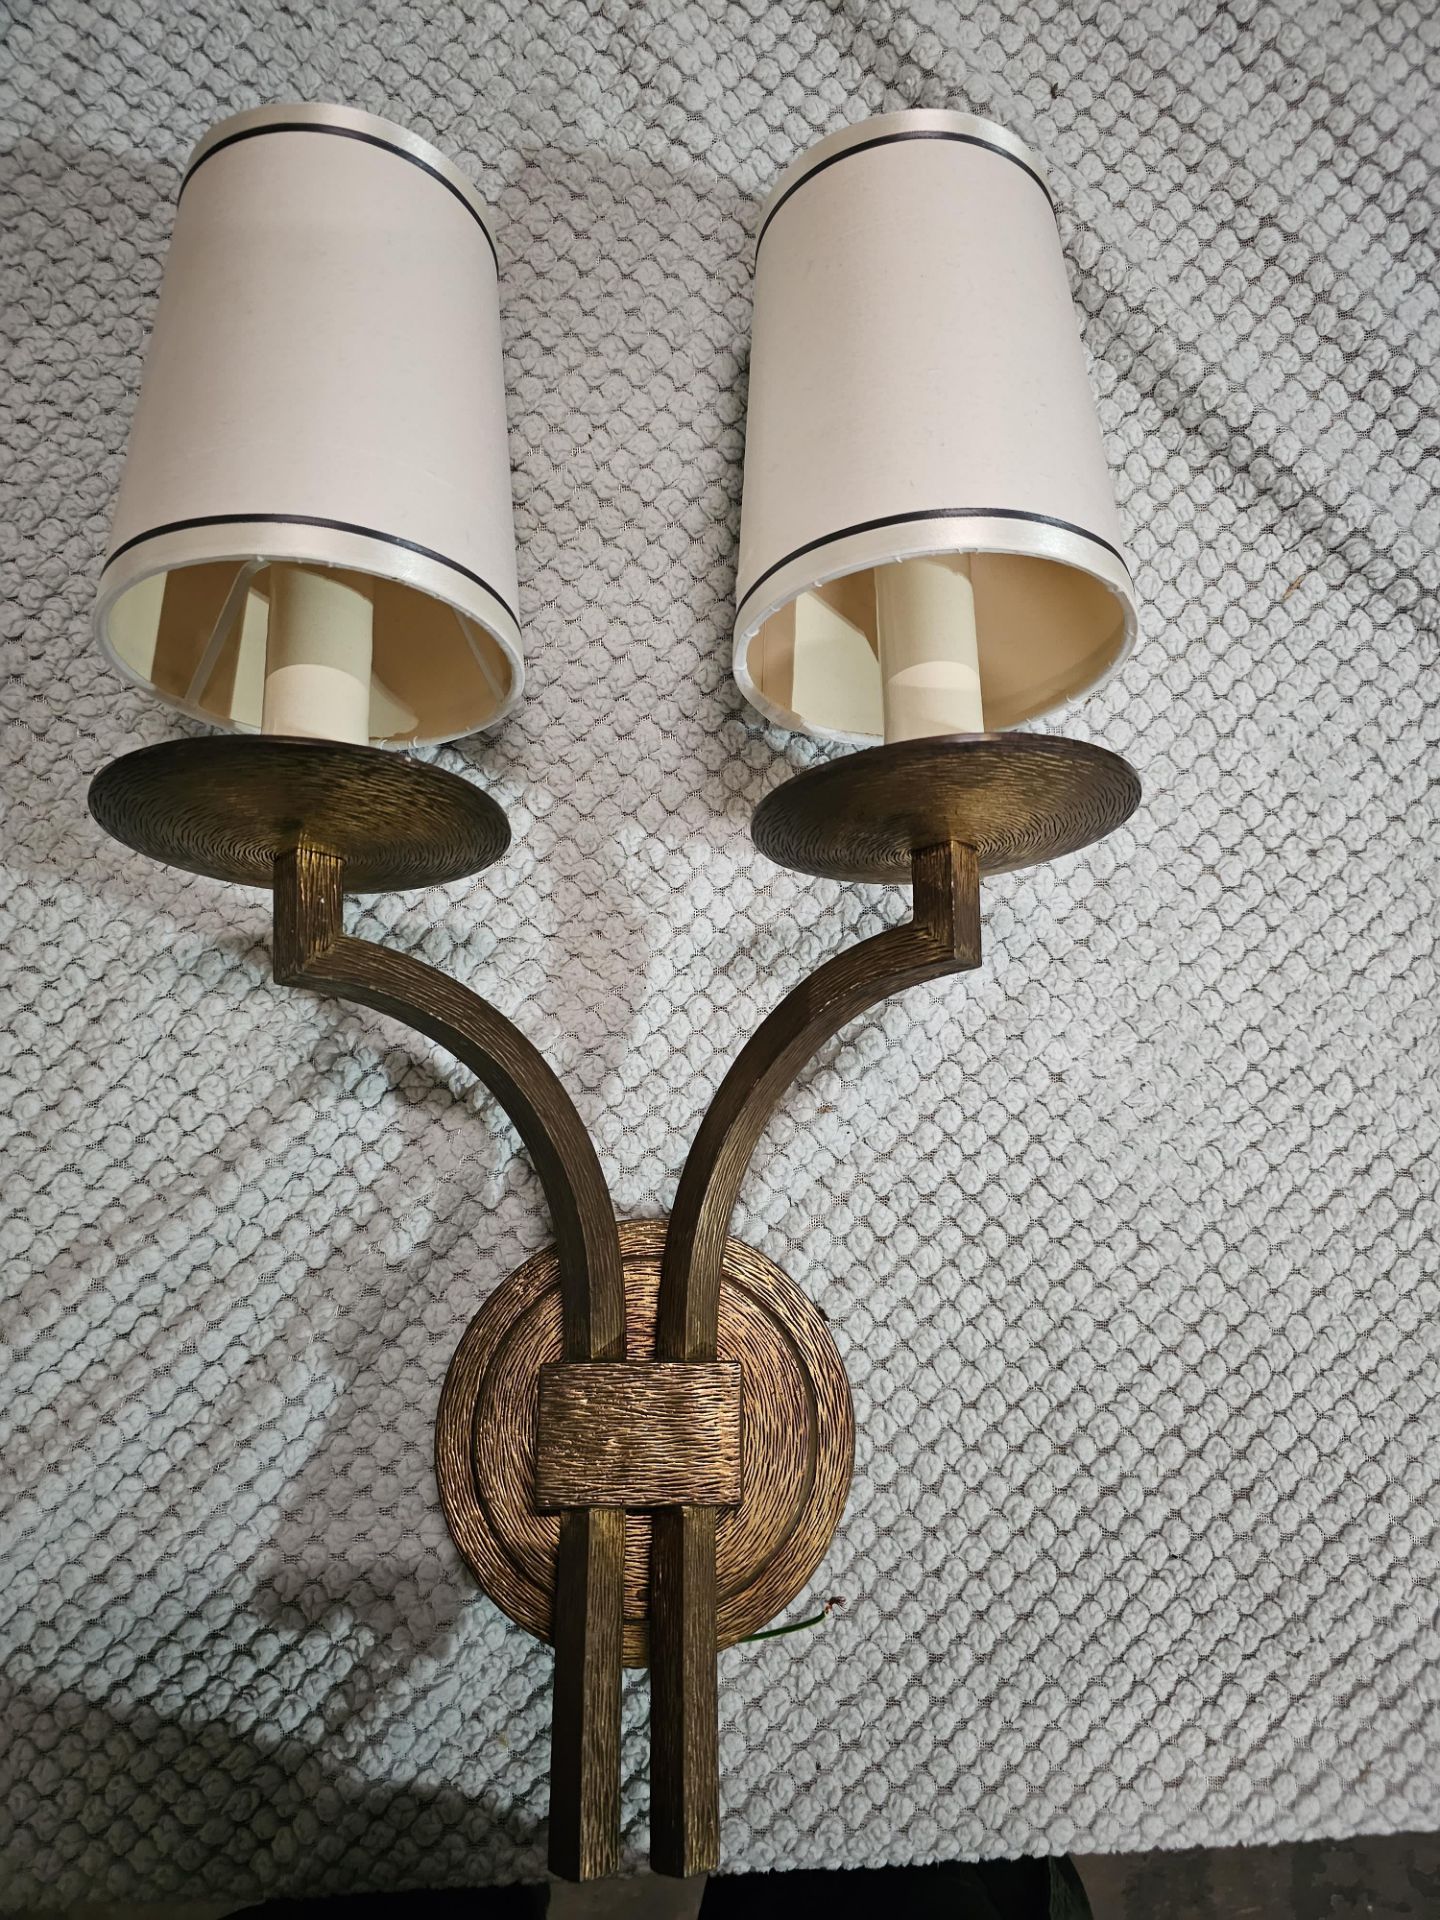 A Dernier And Hamlyn Twin Arm Antique Bronzed Wall Sconces With Shade 51cm - Image 3 of 3